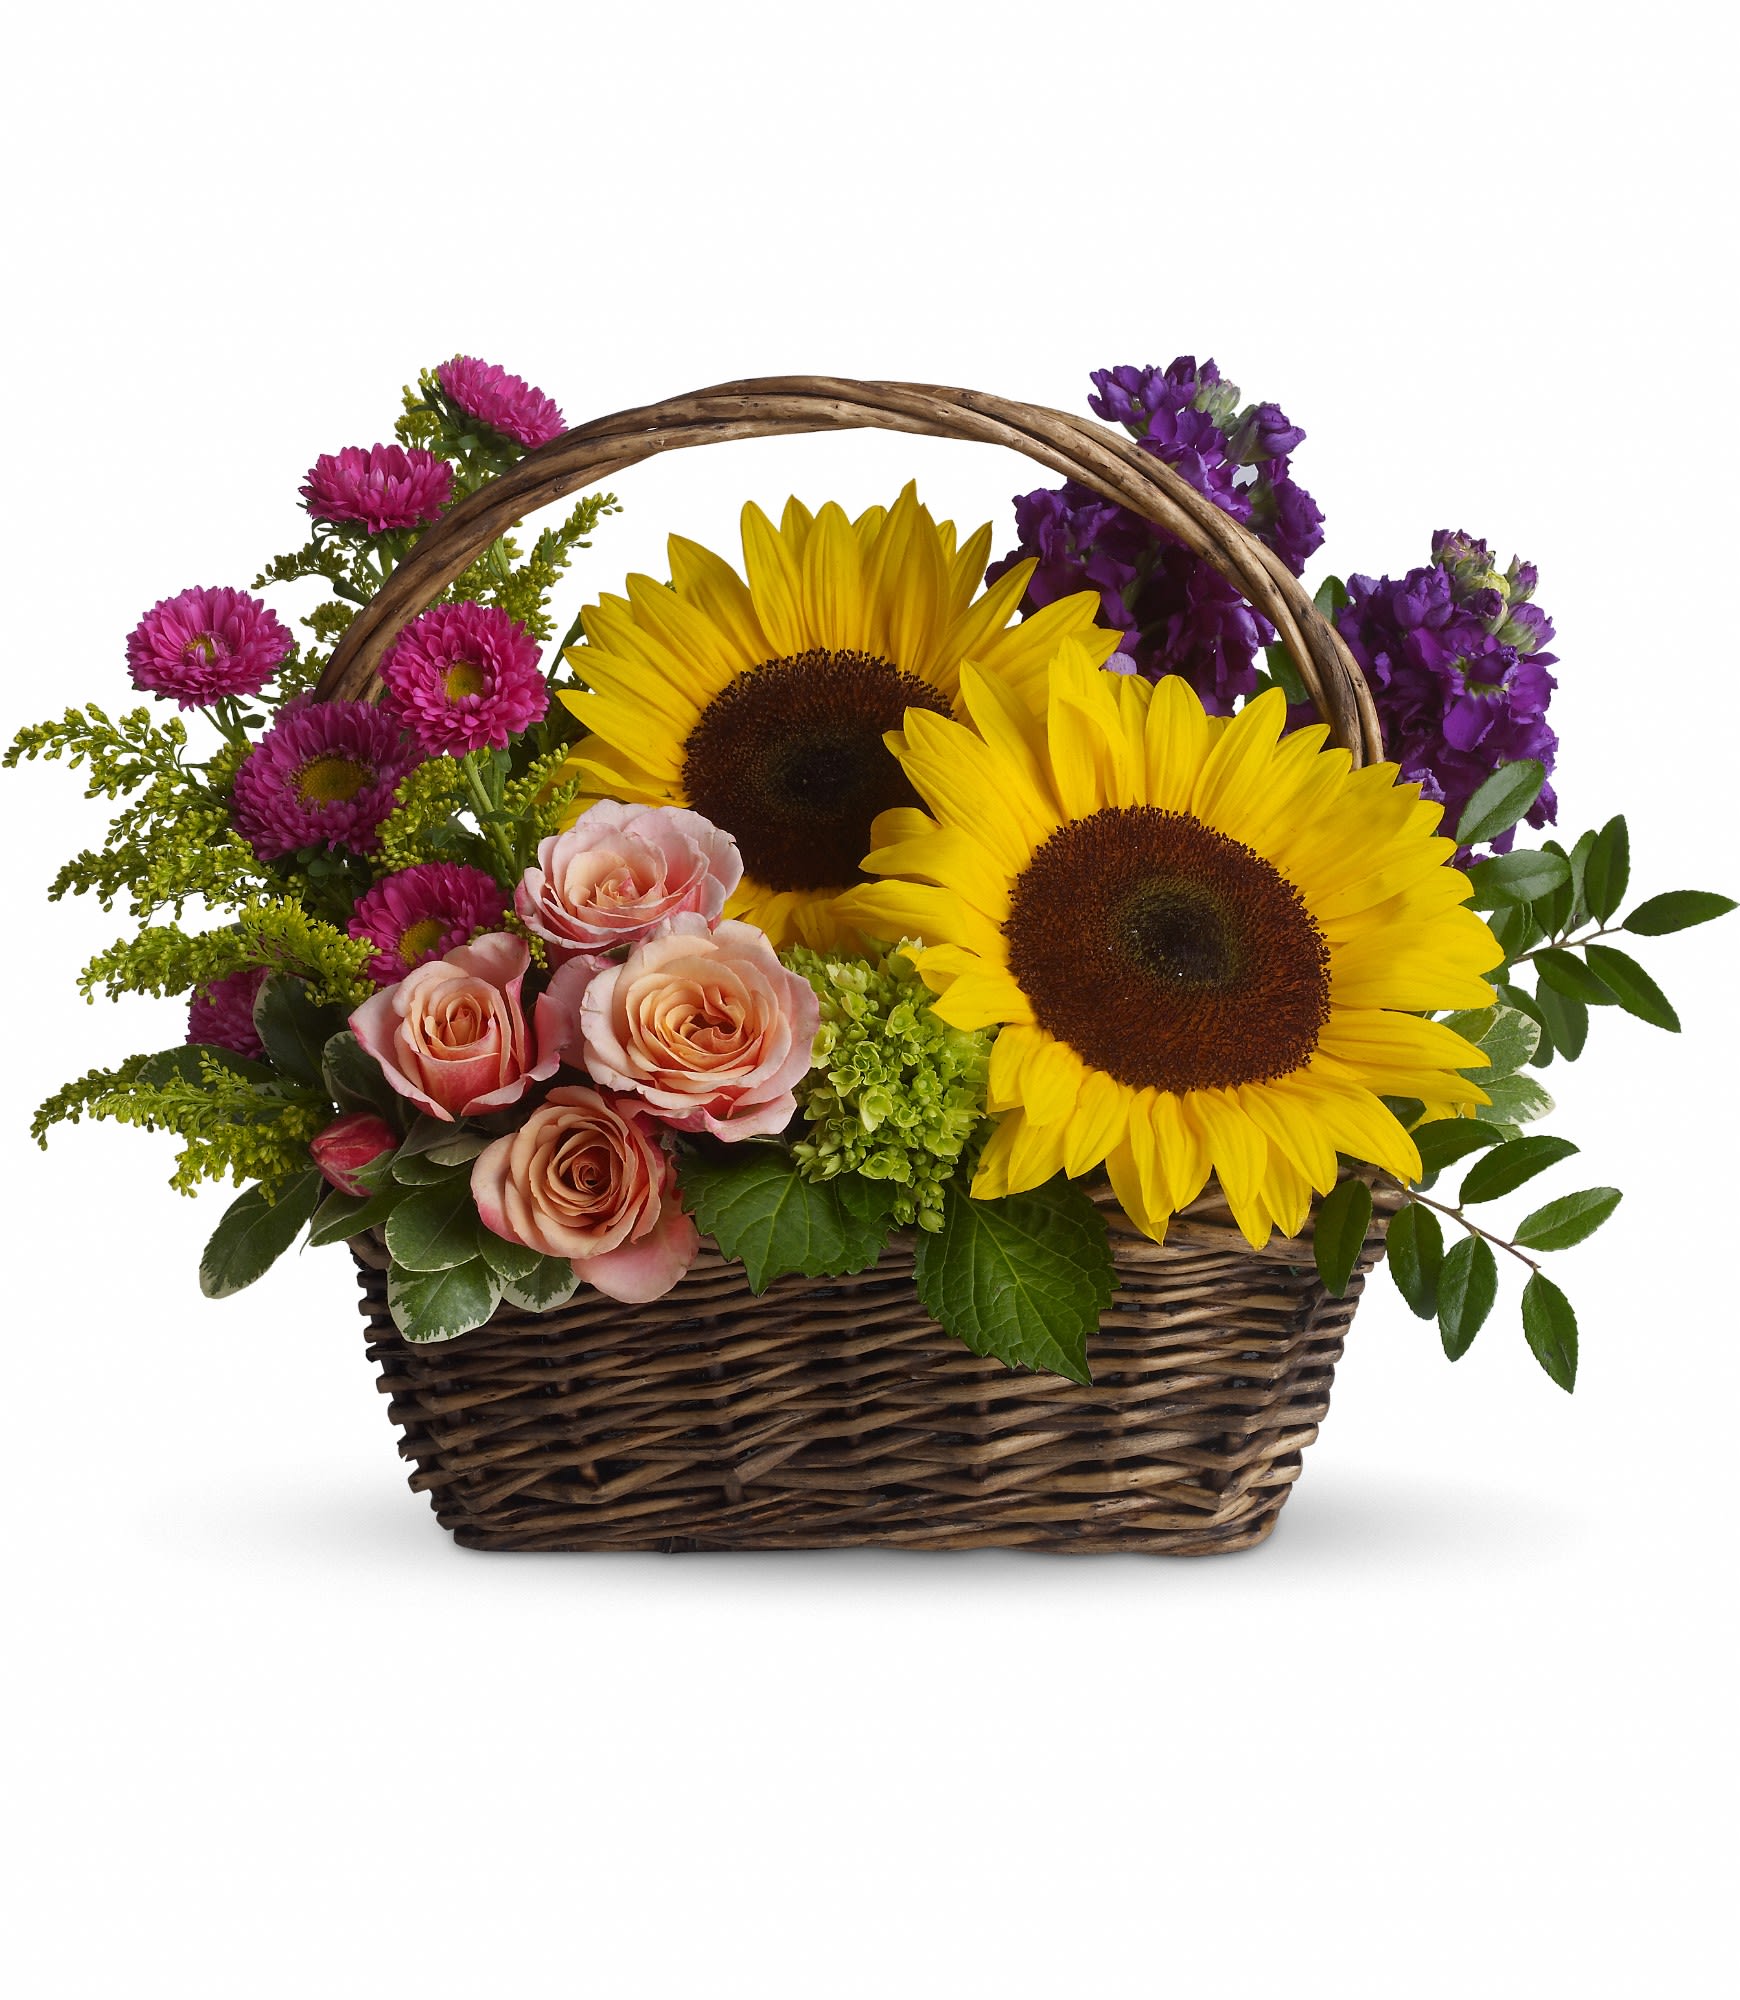 Picnic in the Park - Send this colorful gift basket of flowers to your favorite garden lover or flower-loving grandmother. Like a miniature summer garden, the fresh cut flowers will brighten her kitchen counter, bedside table, coffee table...any of her favorite places!   Large yellow sunflowers, peach roses, purple stock, miniature green hydrangea, and hot pink matsumoto asters are presented in a rectangular handled basket. Greens include solidago, huckleberry and variegated pittosporum.  Approximately 12 1/2&quot; W x 18&quot; H  Orientation: All-Around